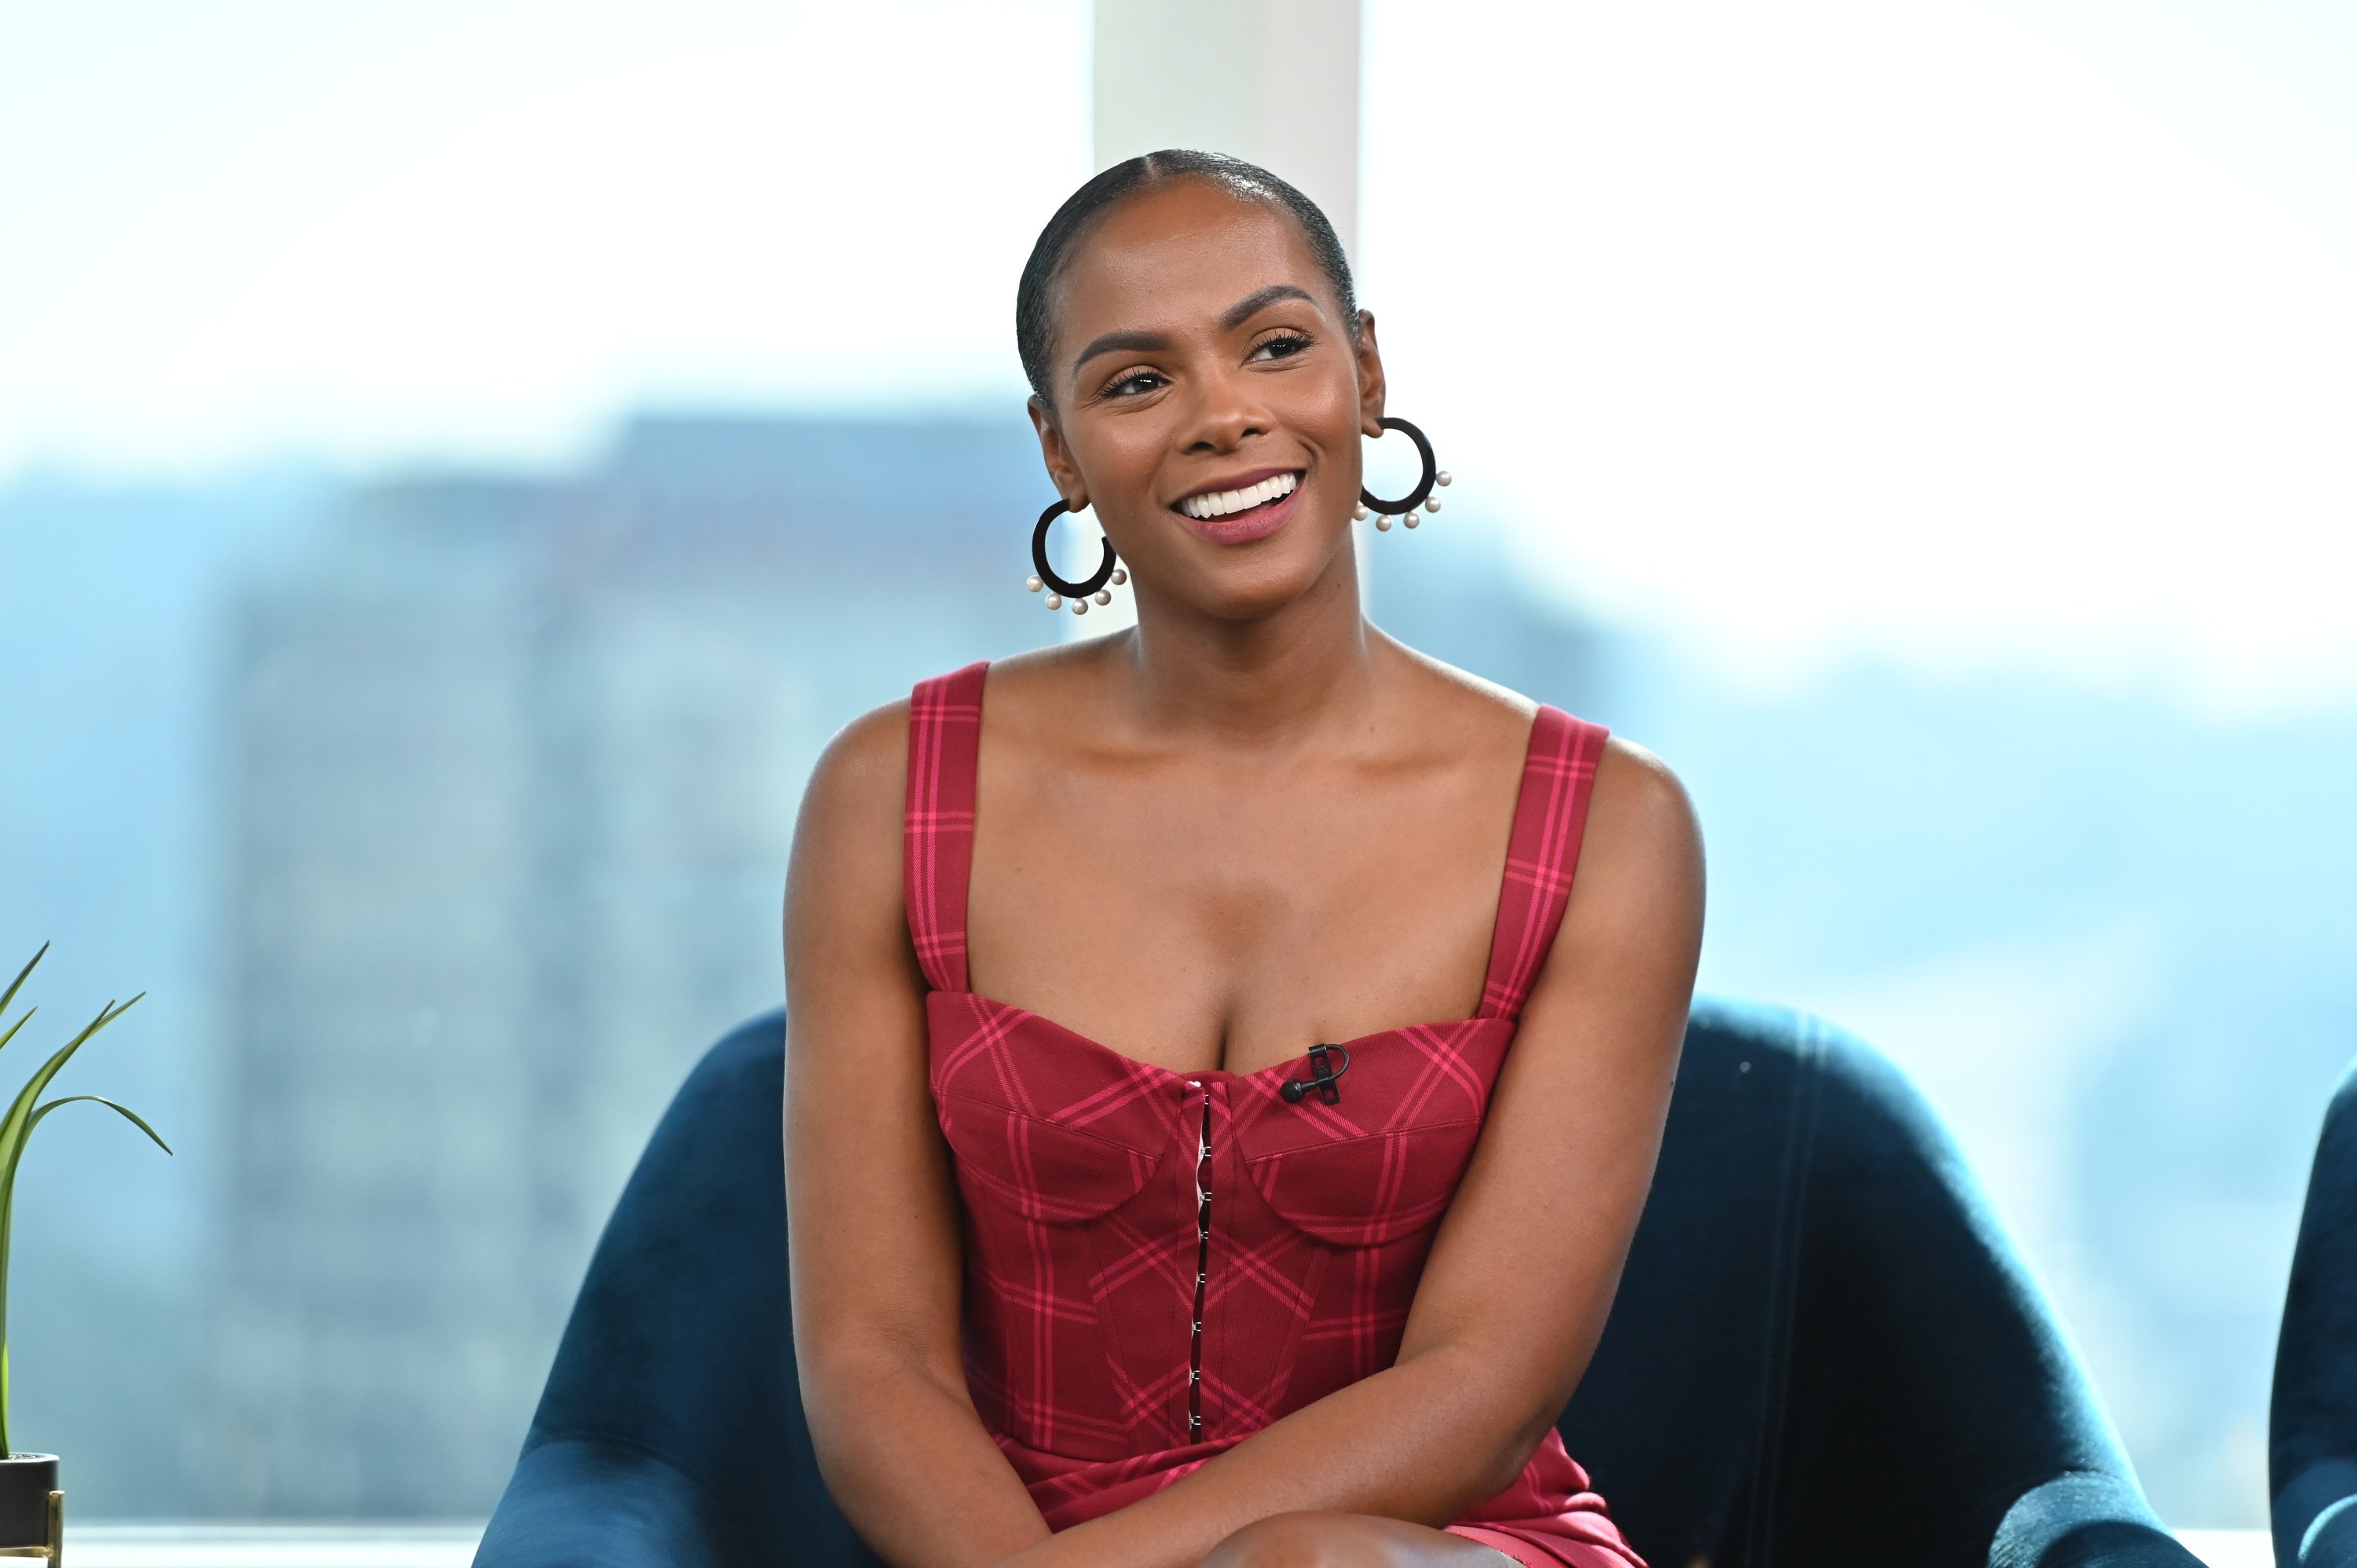 Tika Sumpter on the set of E!’s Daily Pop to discuss her movie, “Sonic the Hedgehog”, 2020 | Photo: Getty Images